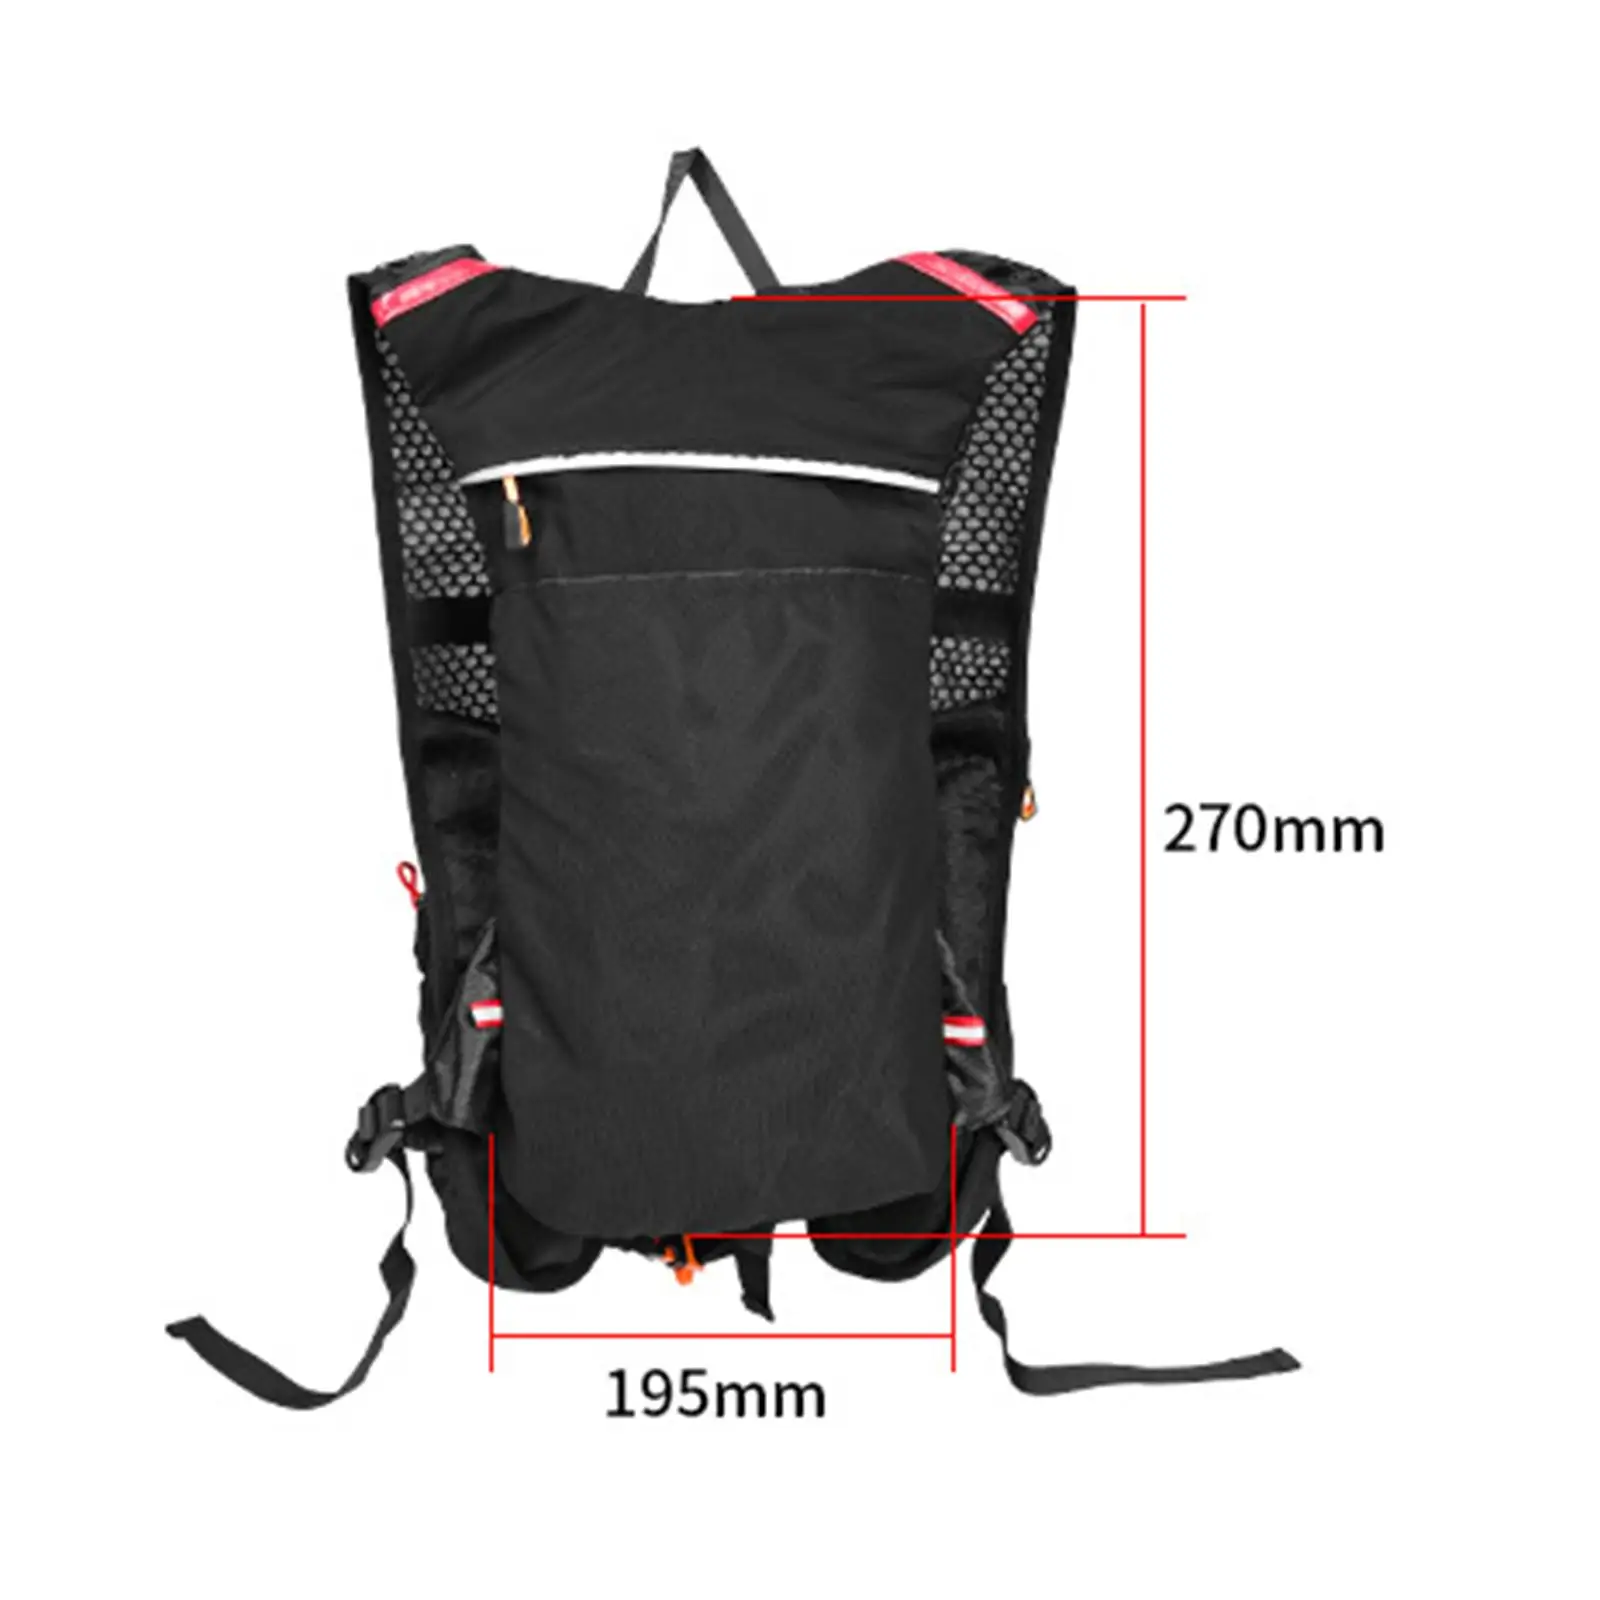 Hydration Backpack Knapsack Durable Lightweight Nylon Practical Rucksack Daypack for Outdoor Climbing Riding Hiking Travel